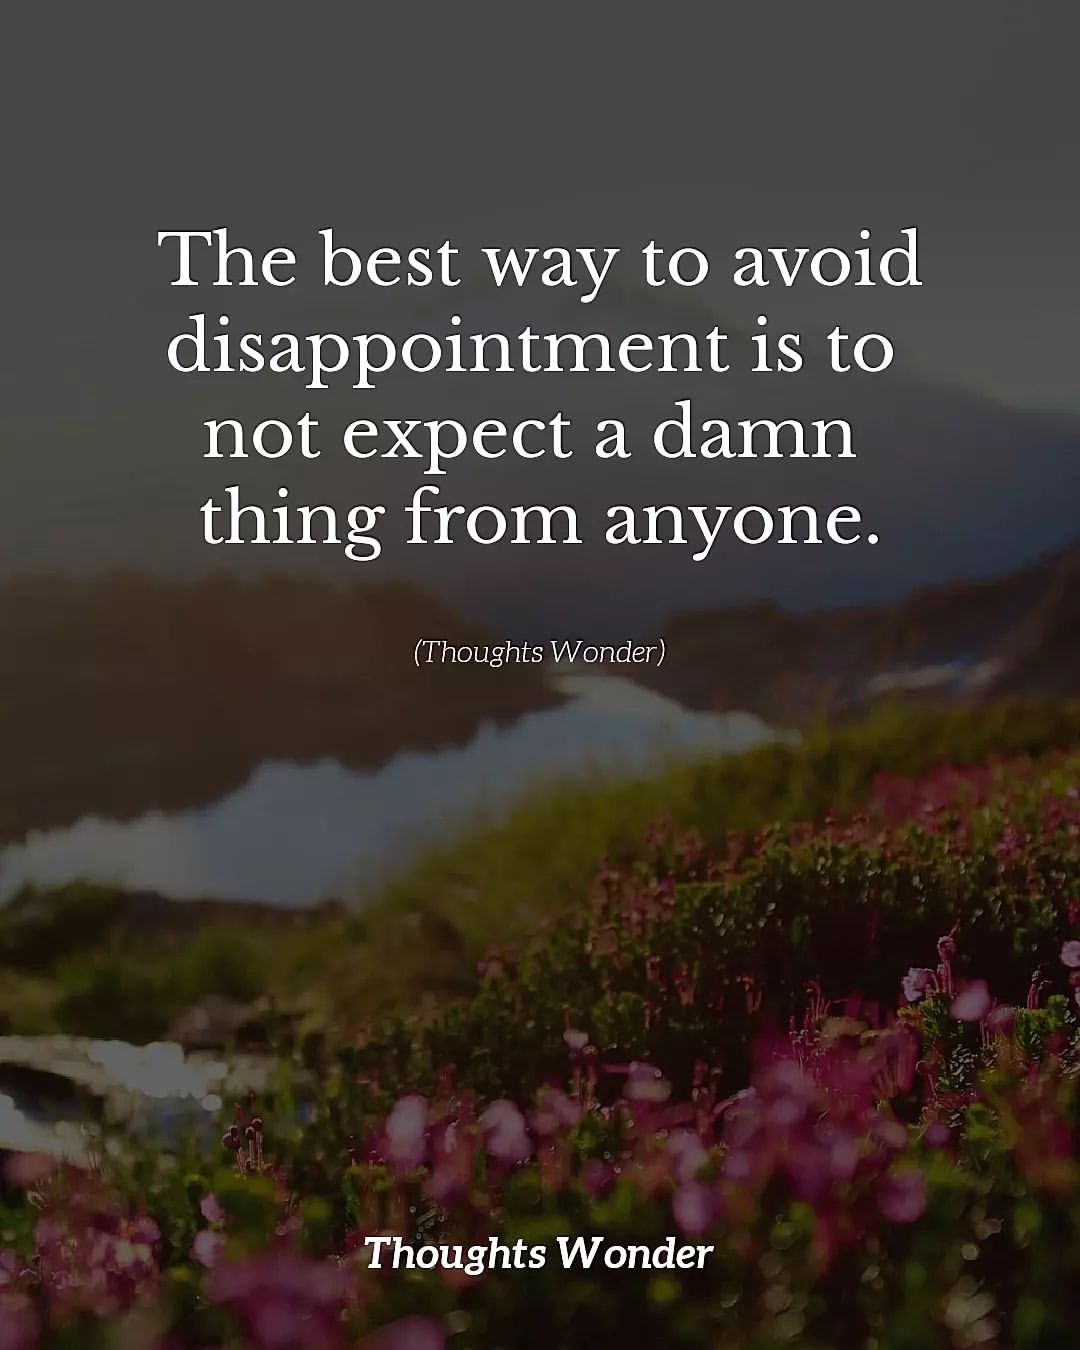 The best way to avoid disappointment is to not expect a damn thing from anyone.